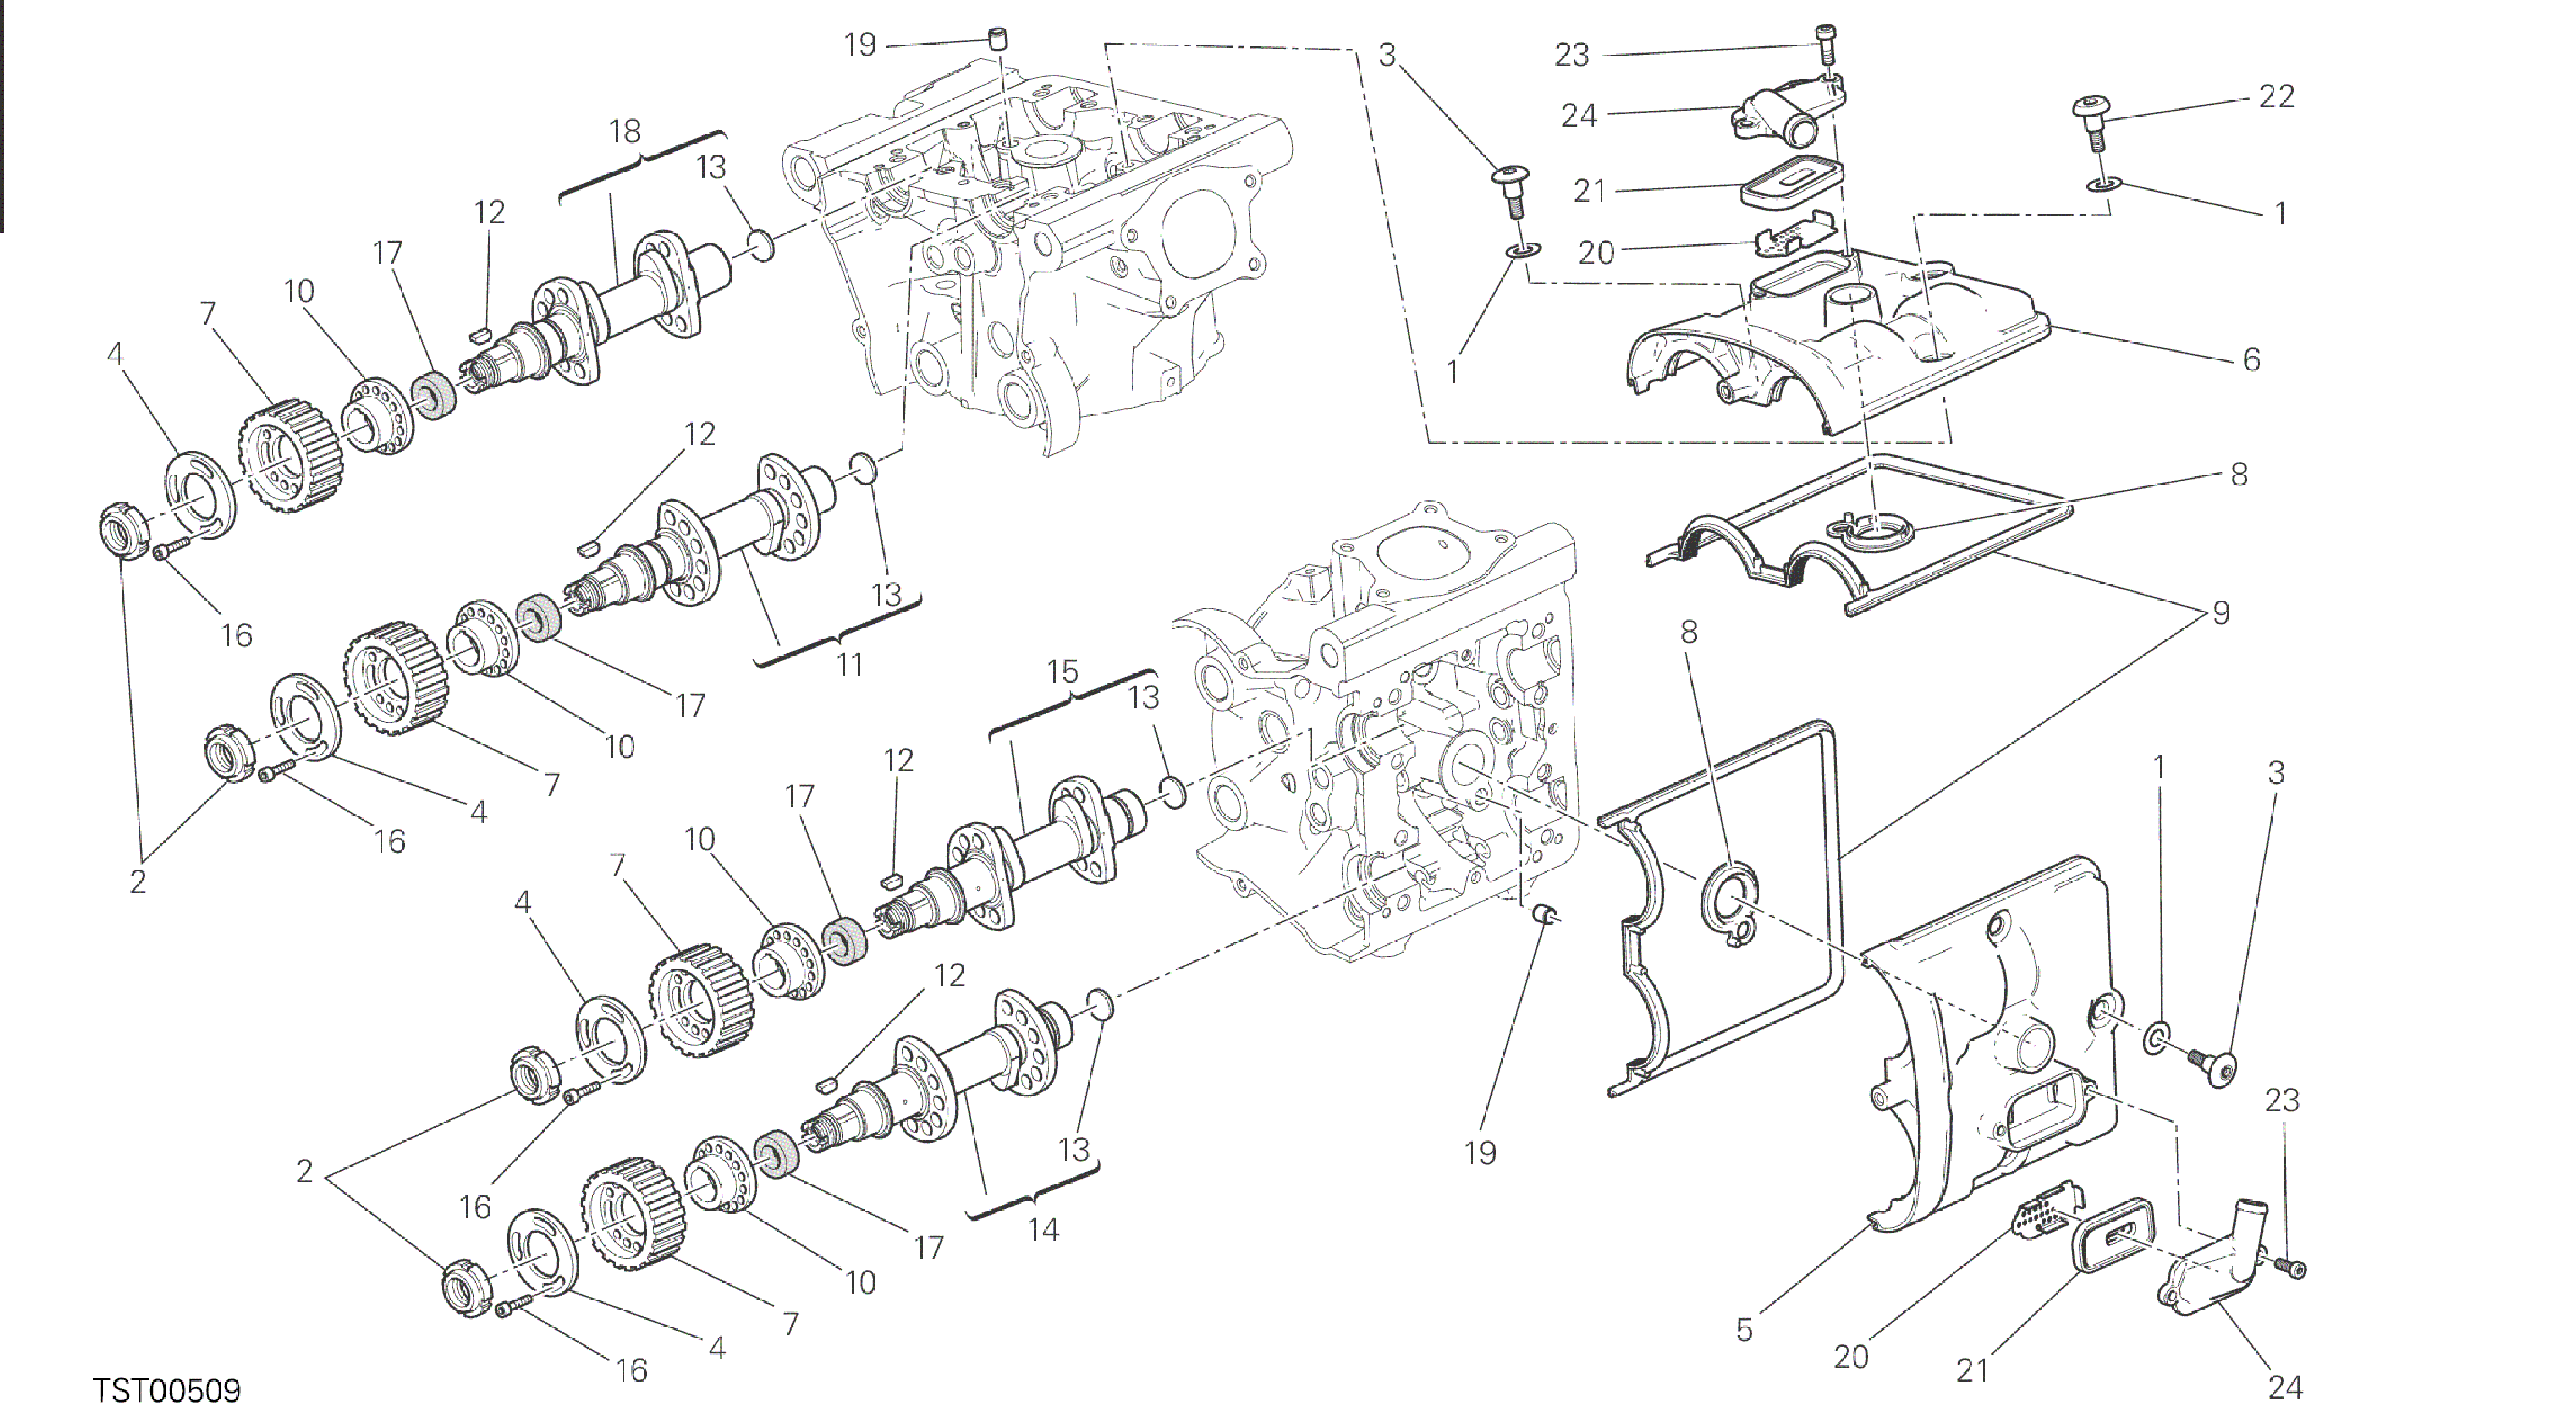 DRAWING 013 - CYLINDER HEAD : TIMING SYSTEM [MOD:M 821]GROUP ENGINE